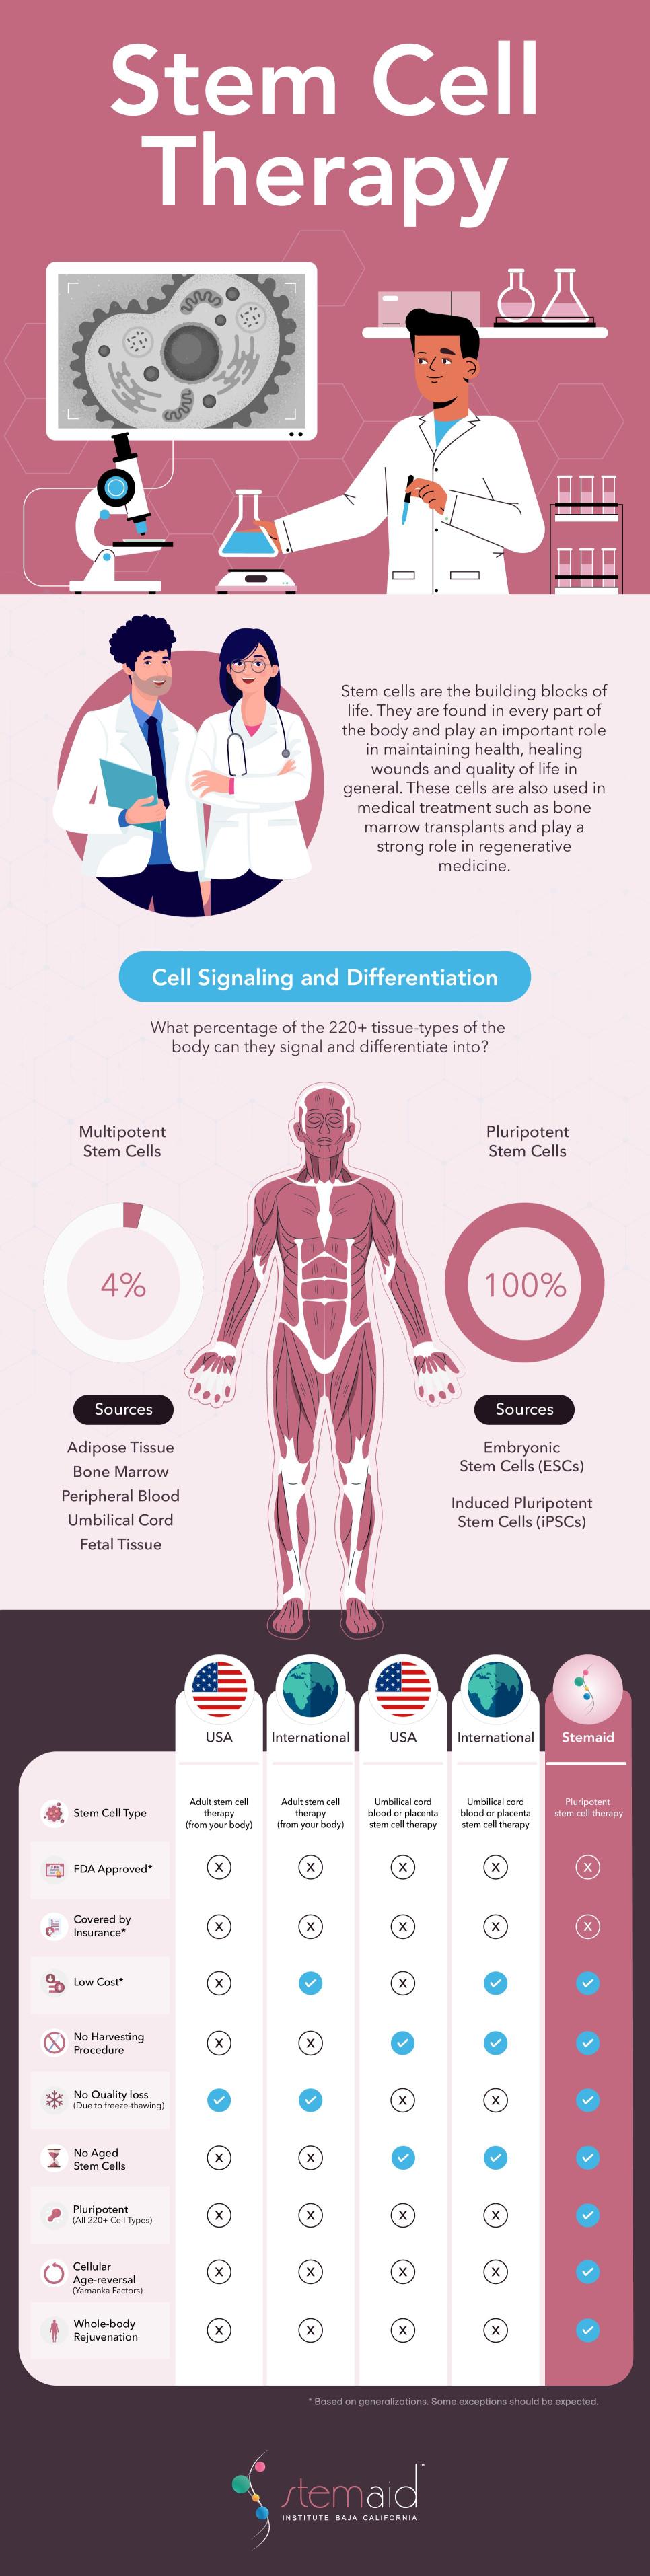 Stem Cell Therapy Comparison Infographic